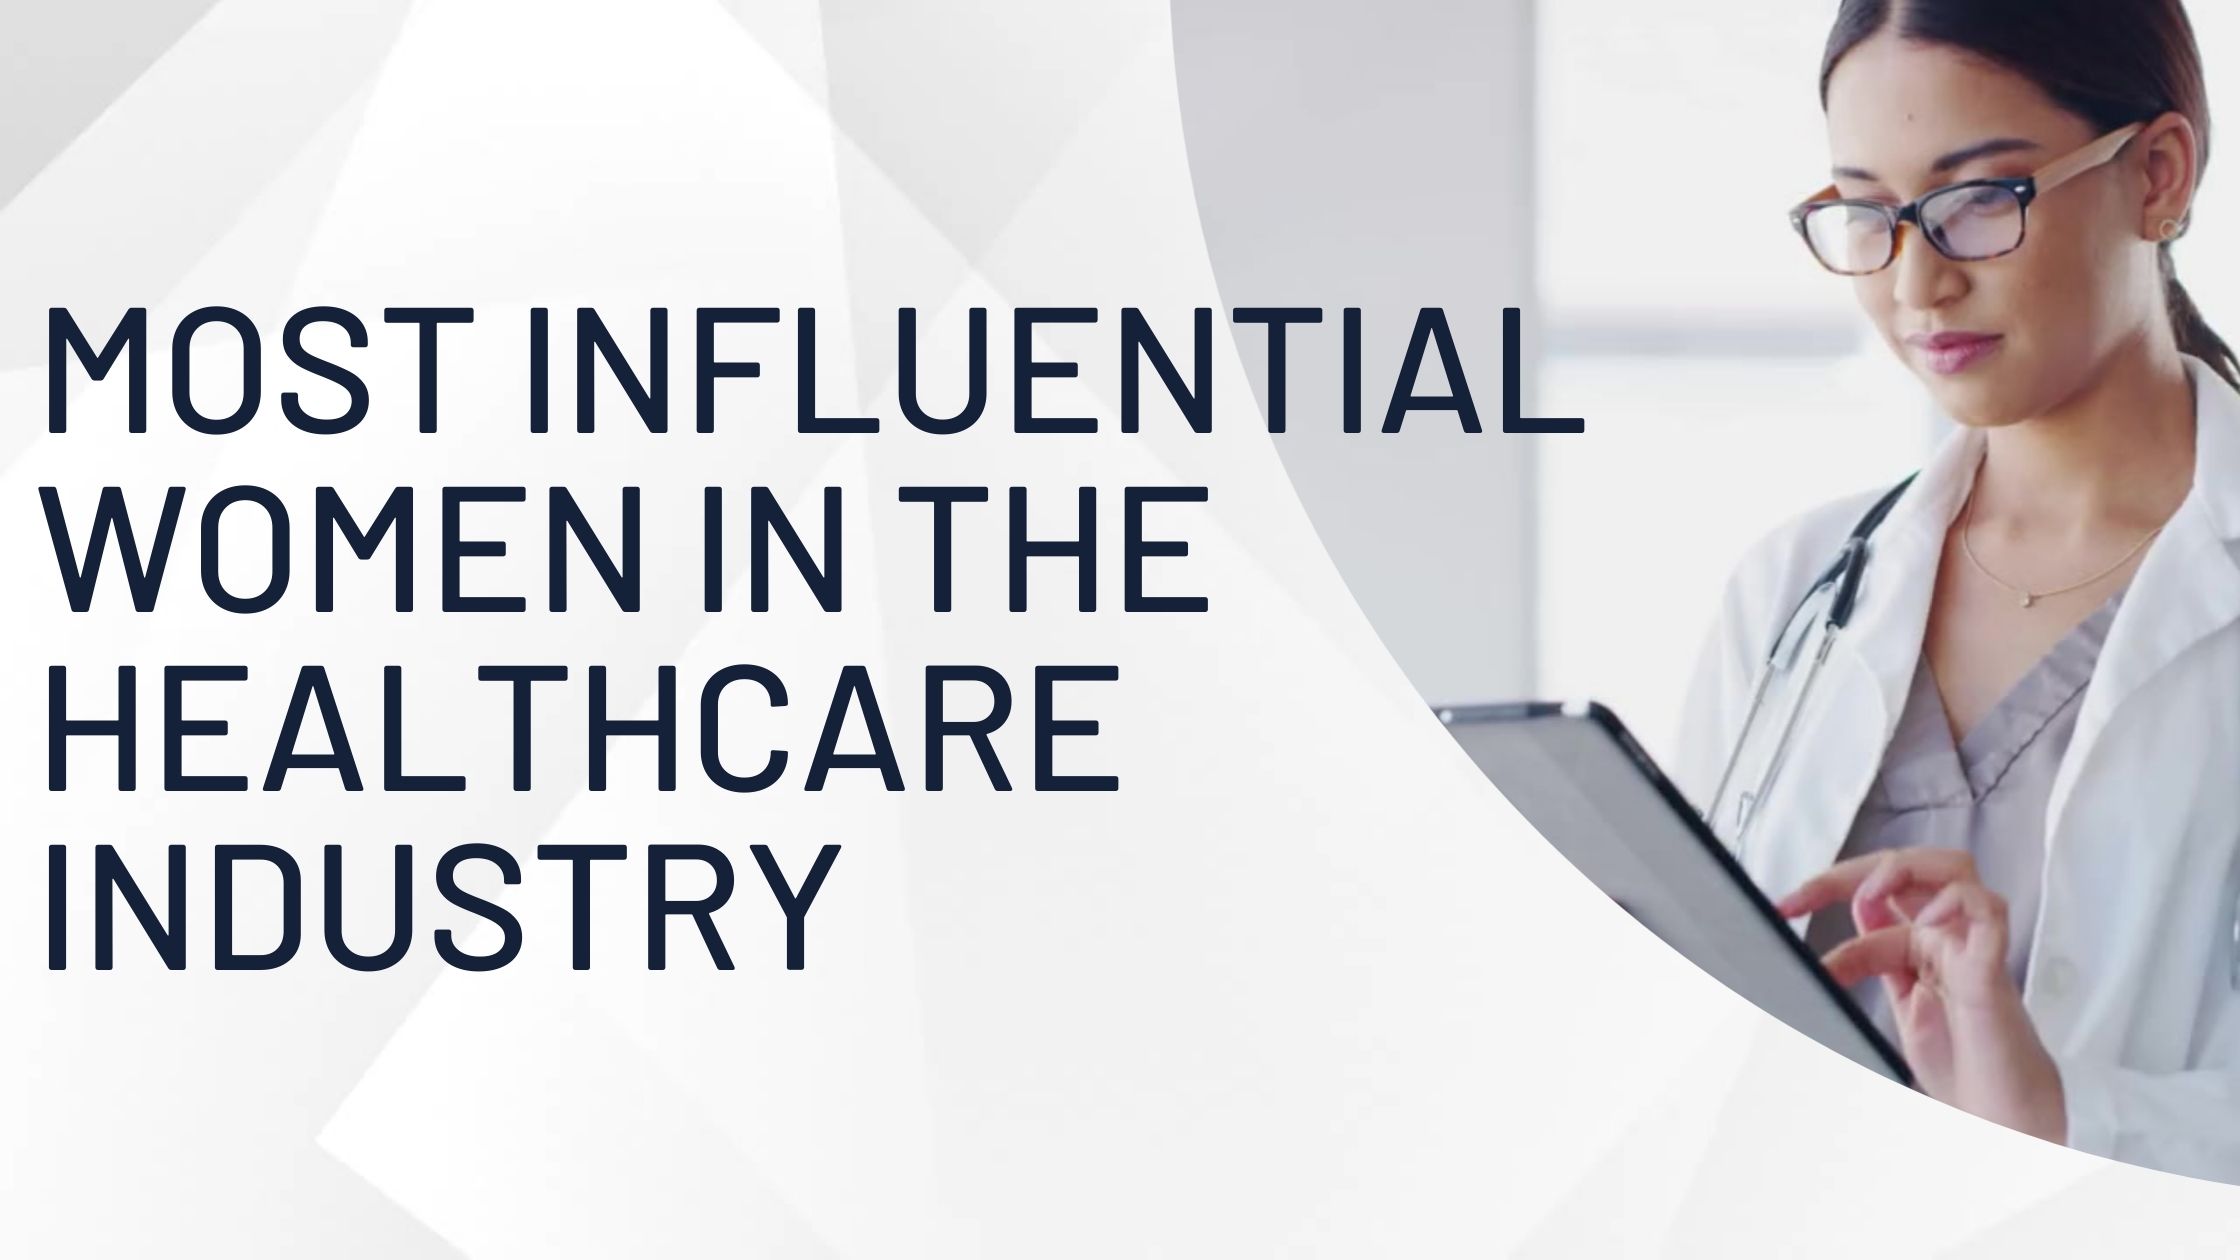 Most influential women in the healthcare industry 